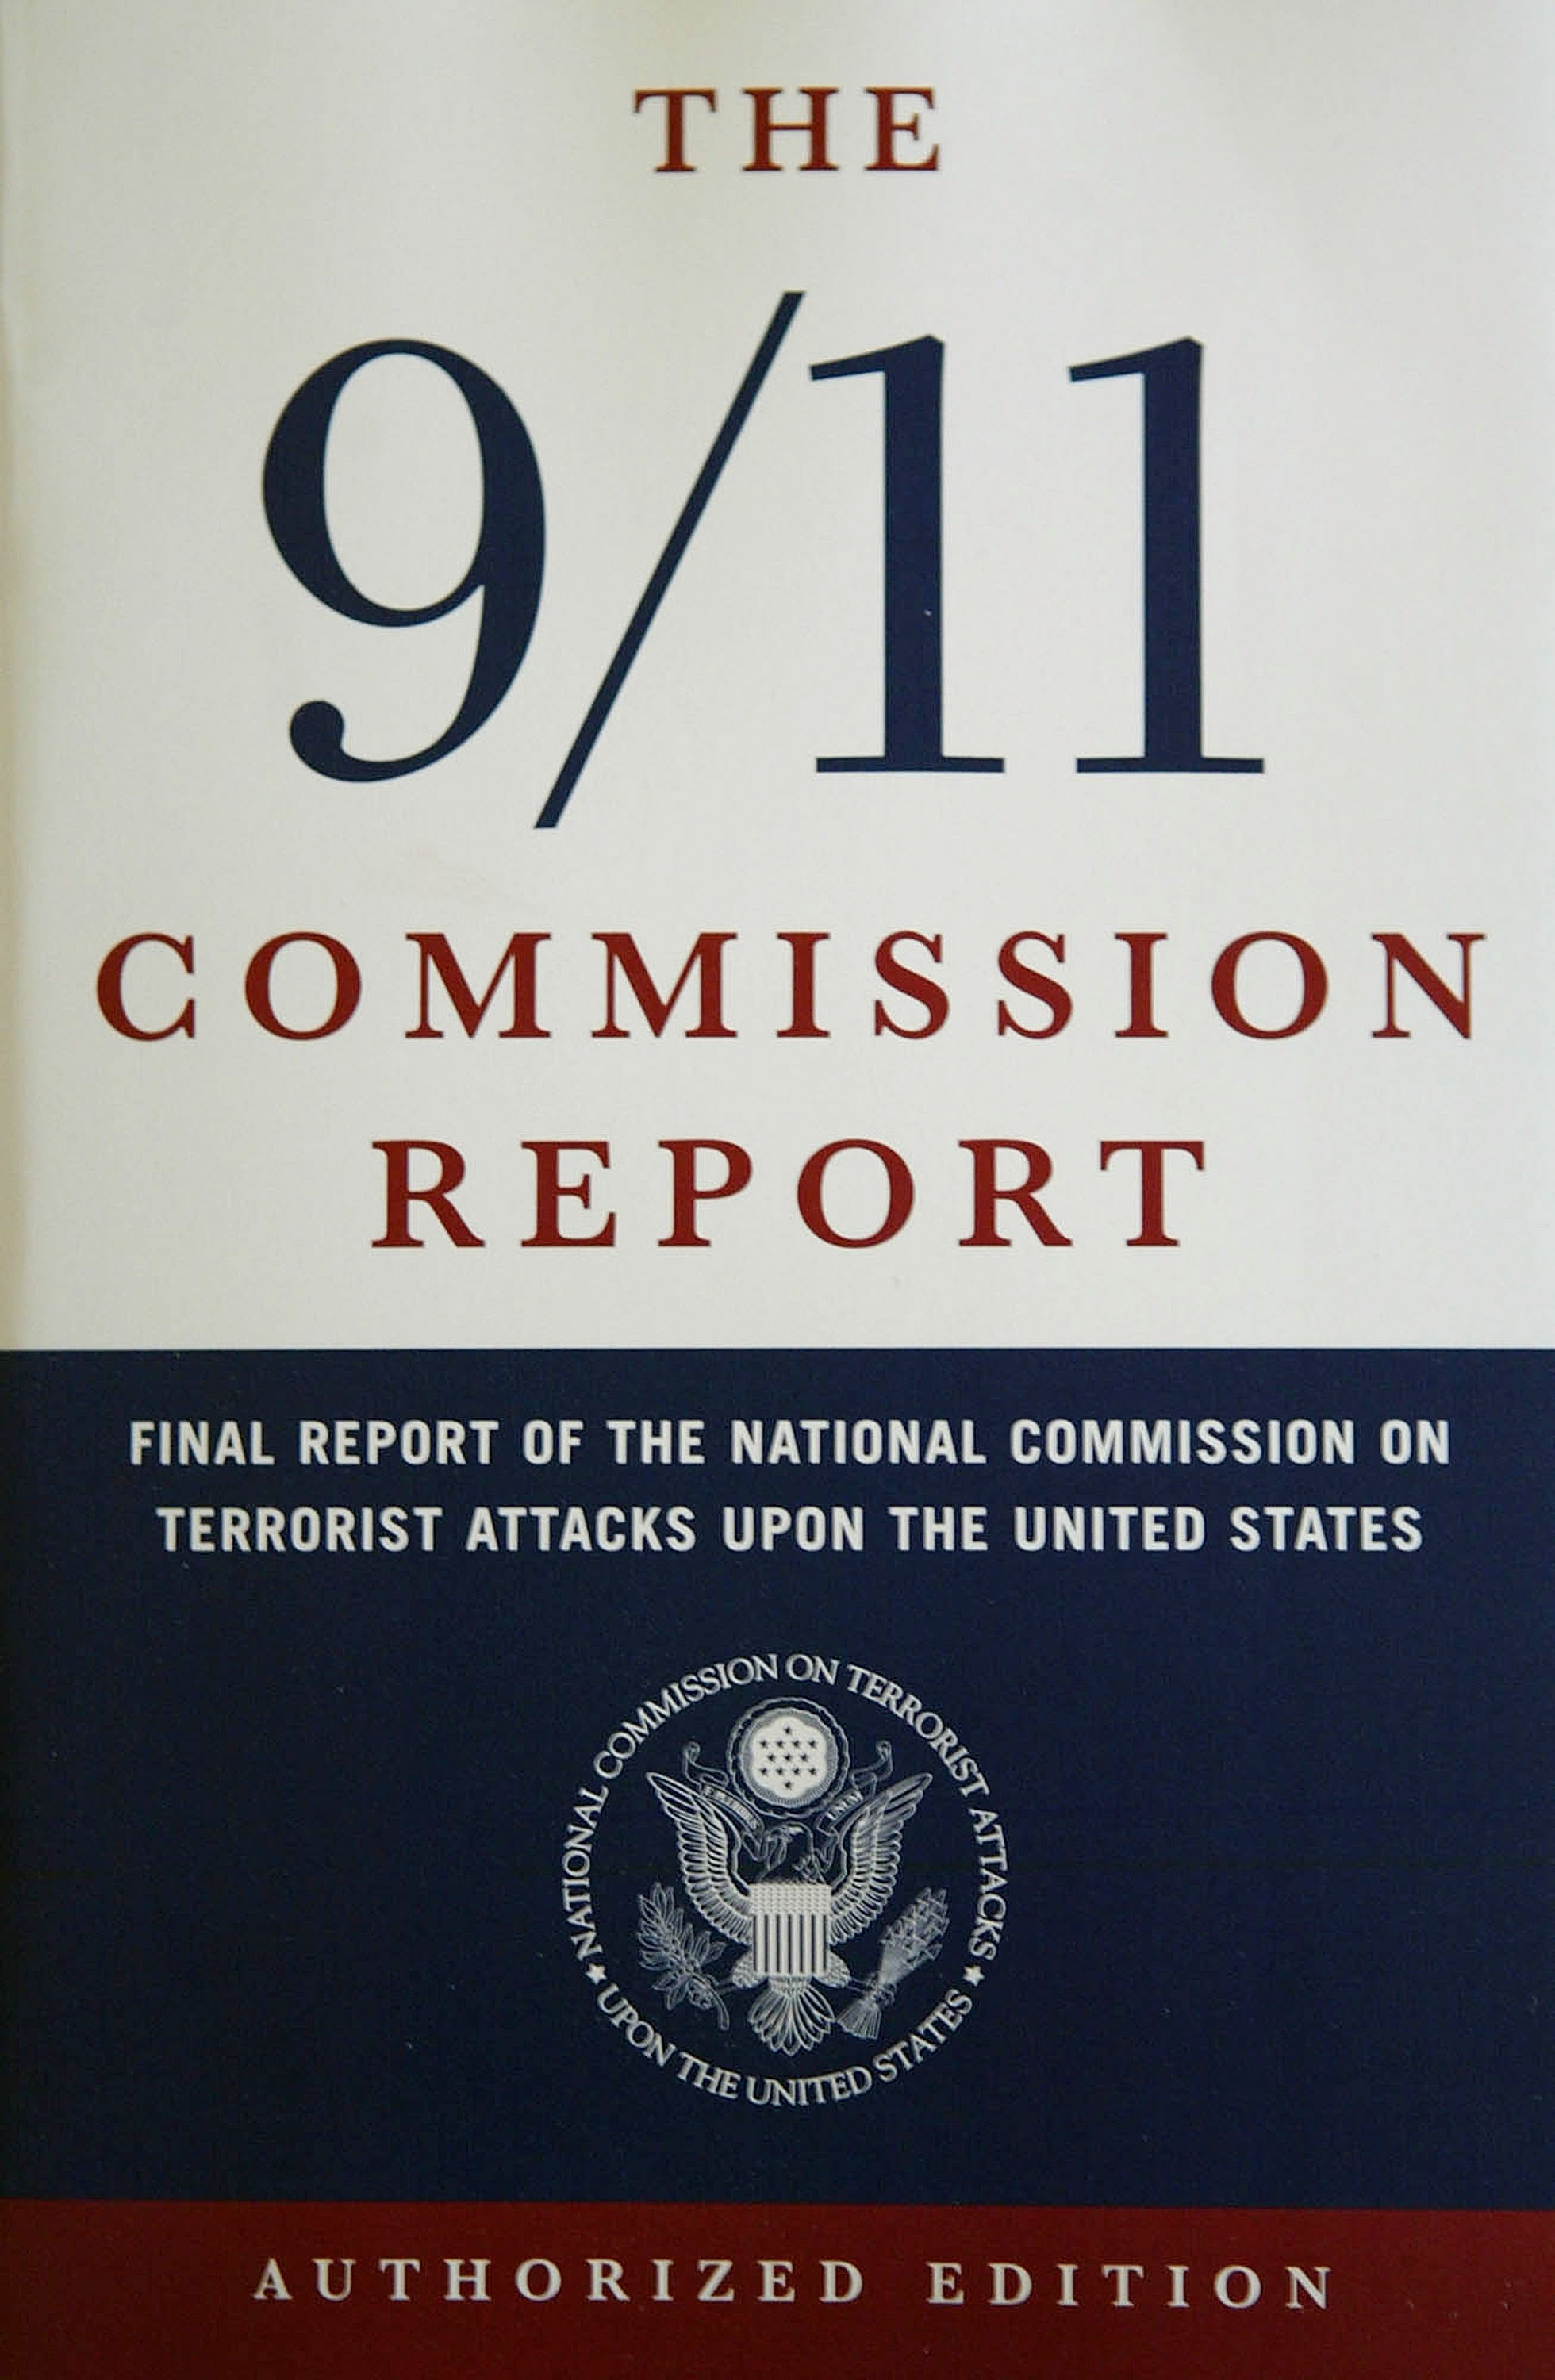 Commission releases updated list of post 9/11 concerns